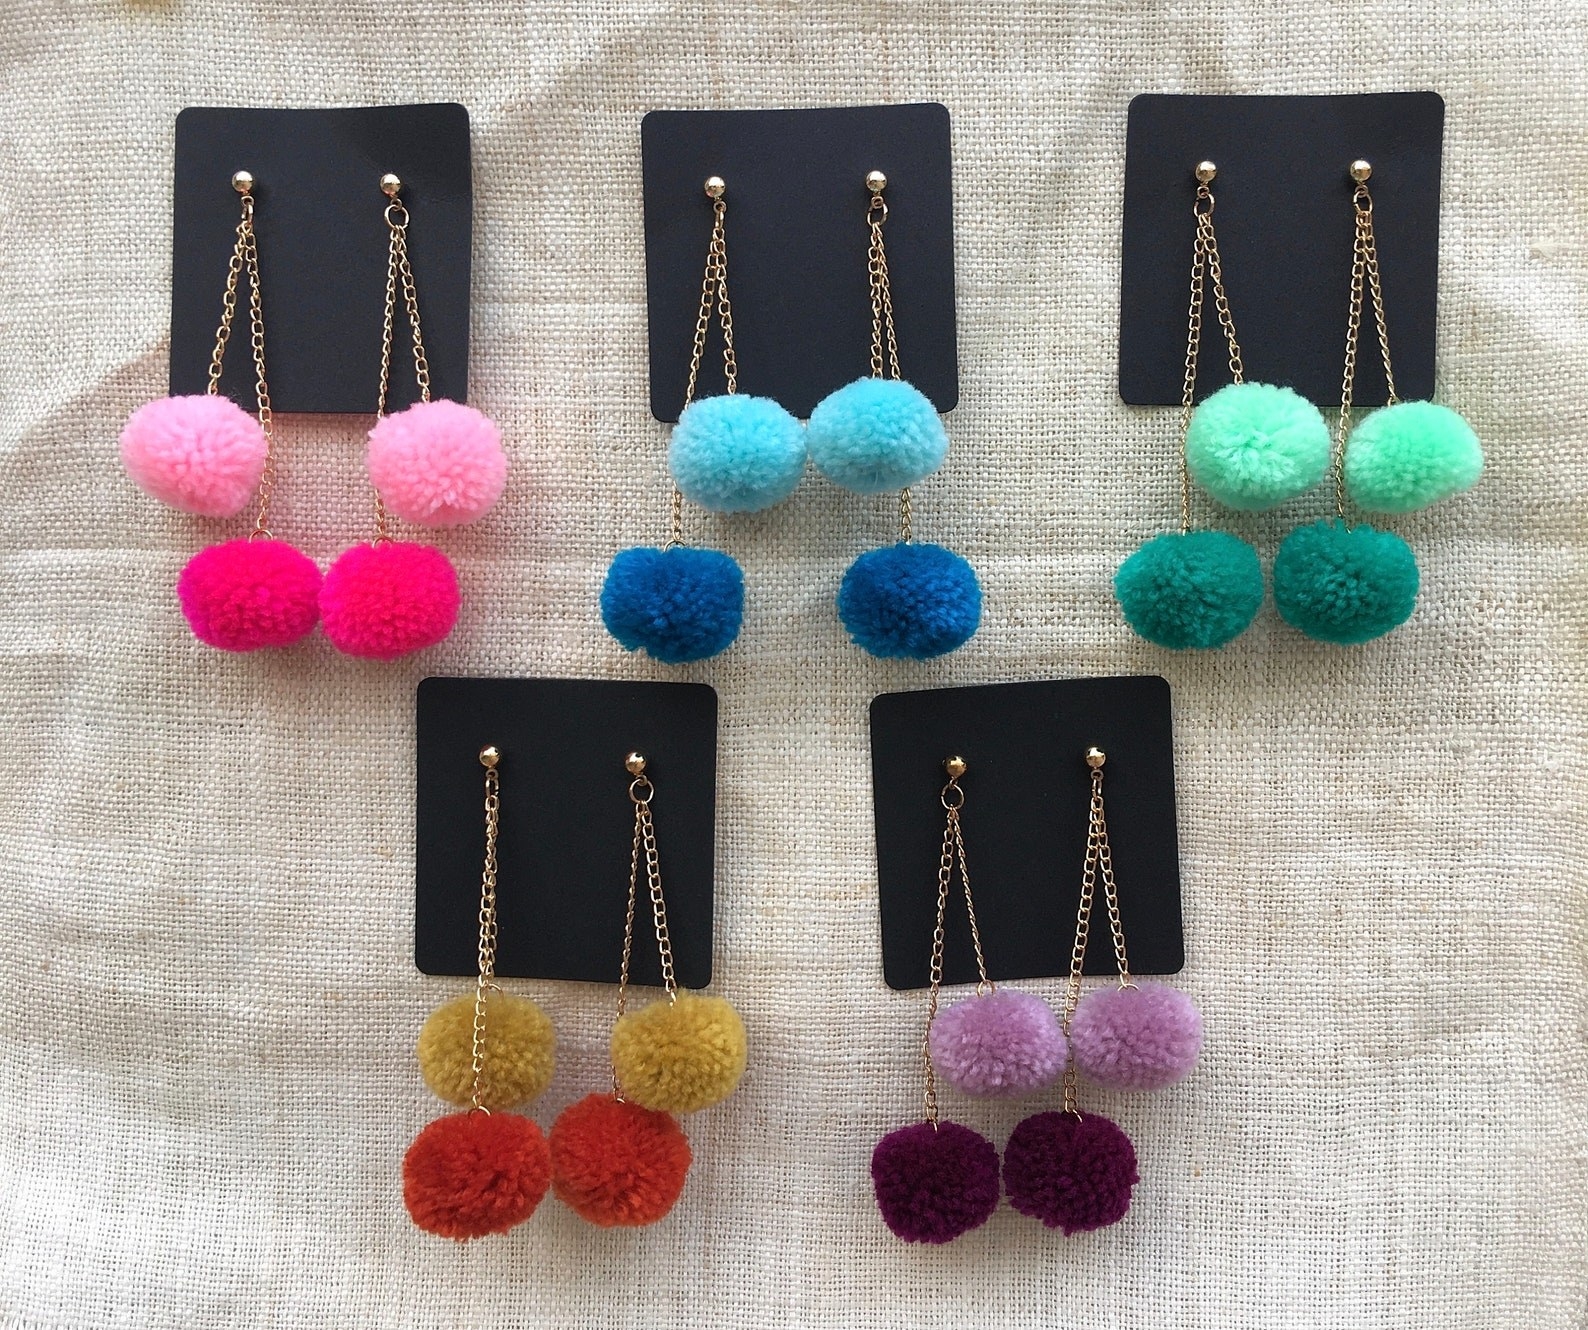 An array of pompom earrings in different colors